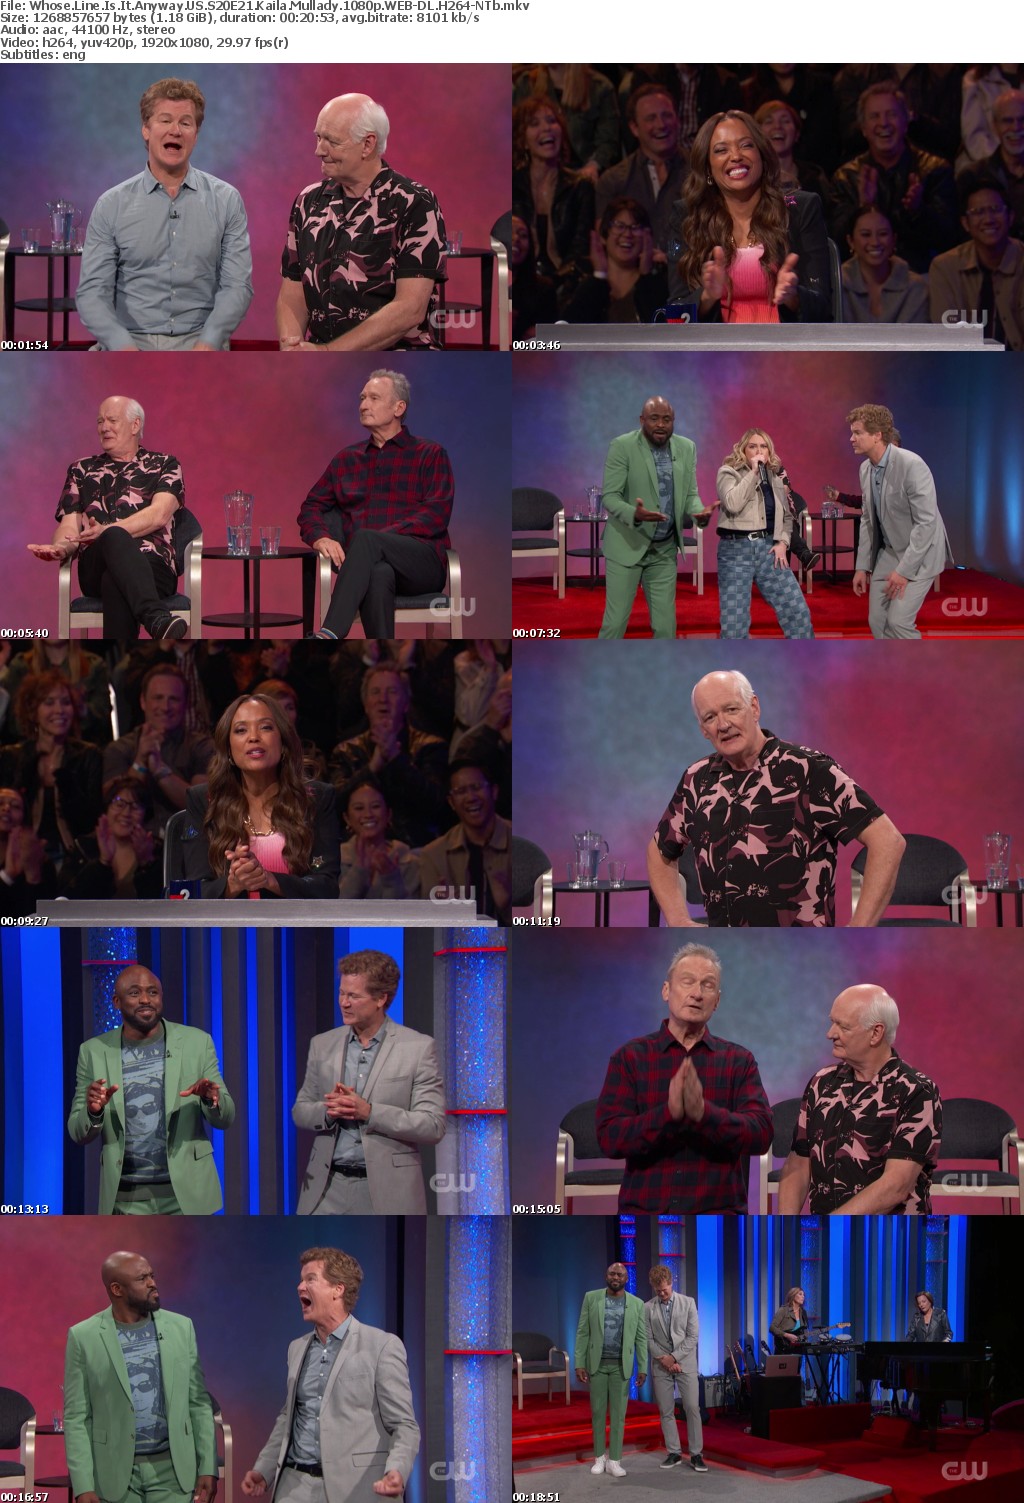 Whose Line Is It Anyway US S20E21 Kaila Mullady 1080p WEB-DL H264-NTb